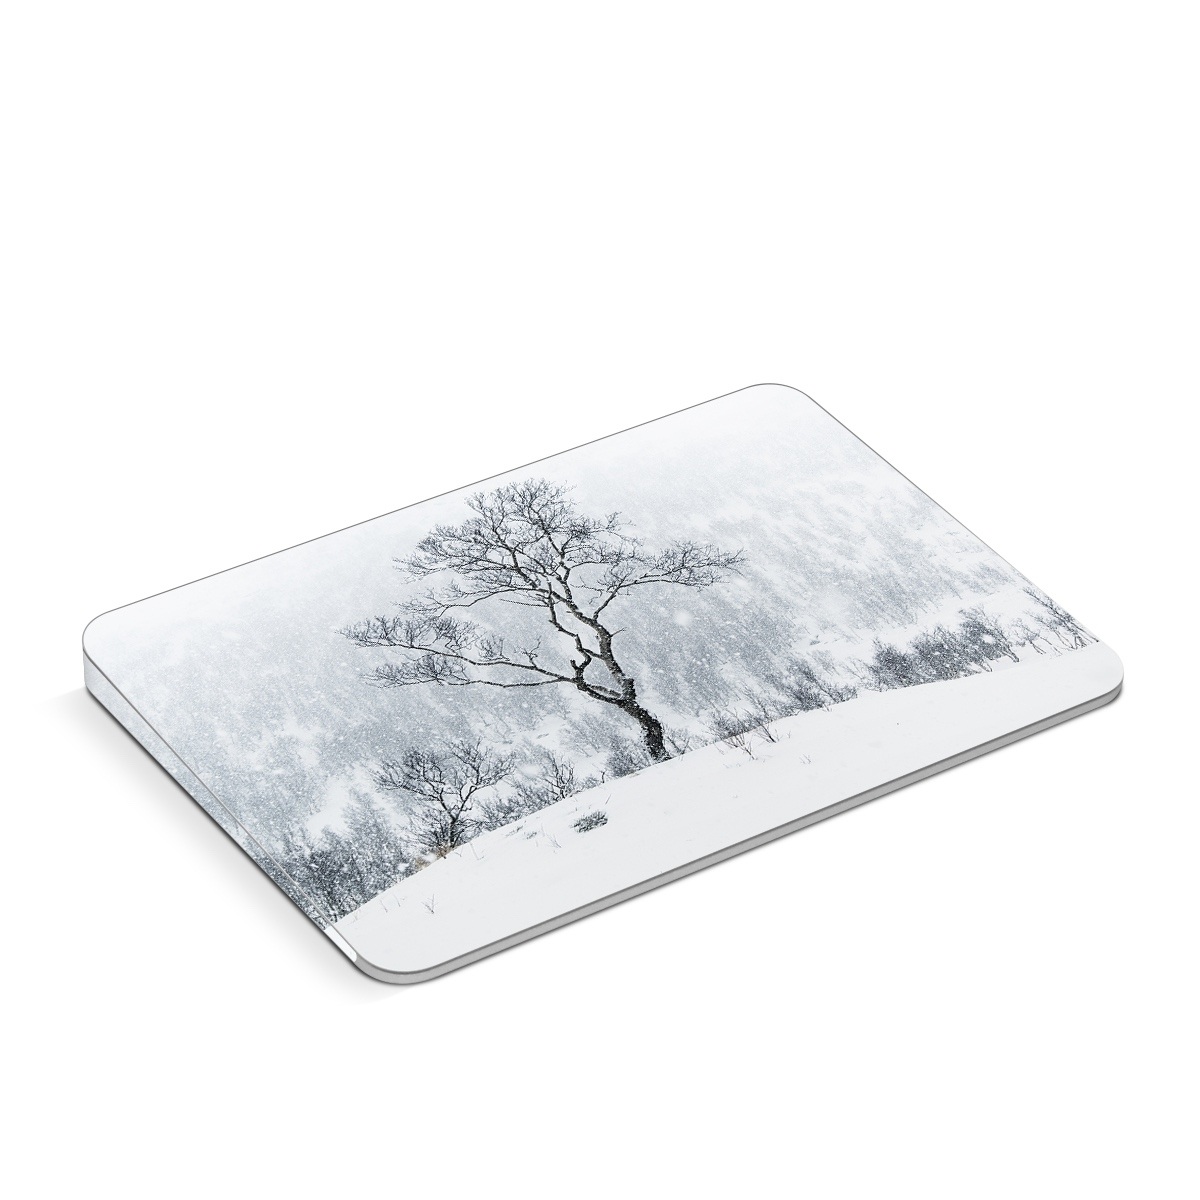 Apple Magic Trackpad Skin design of Snow, Winter, Tree, Nature, White, Sky, Atmospheric phenomenon, Natural landscape, Freezing, Blizzard, with white, gray, black colors